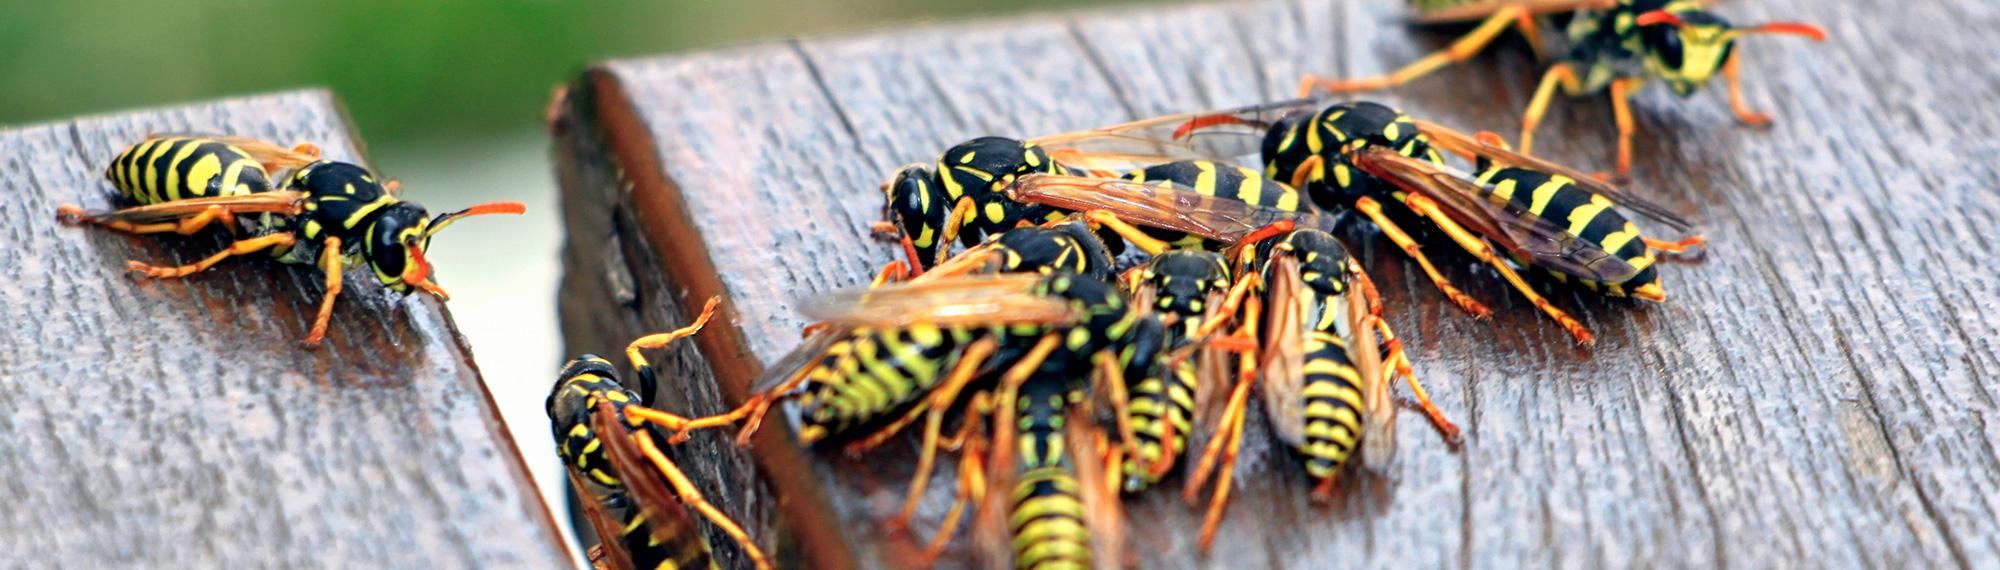 wasps on picnic table